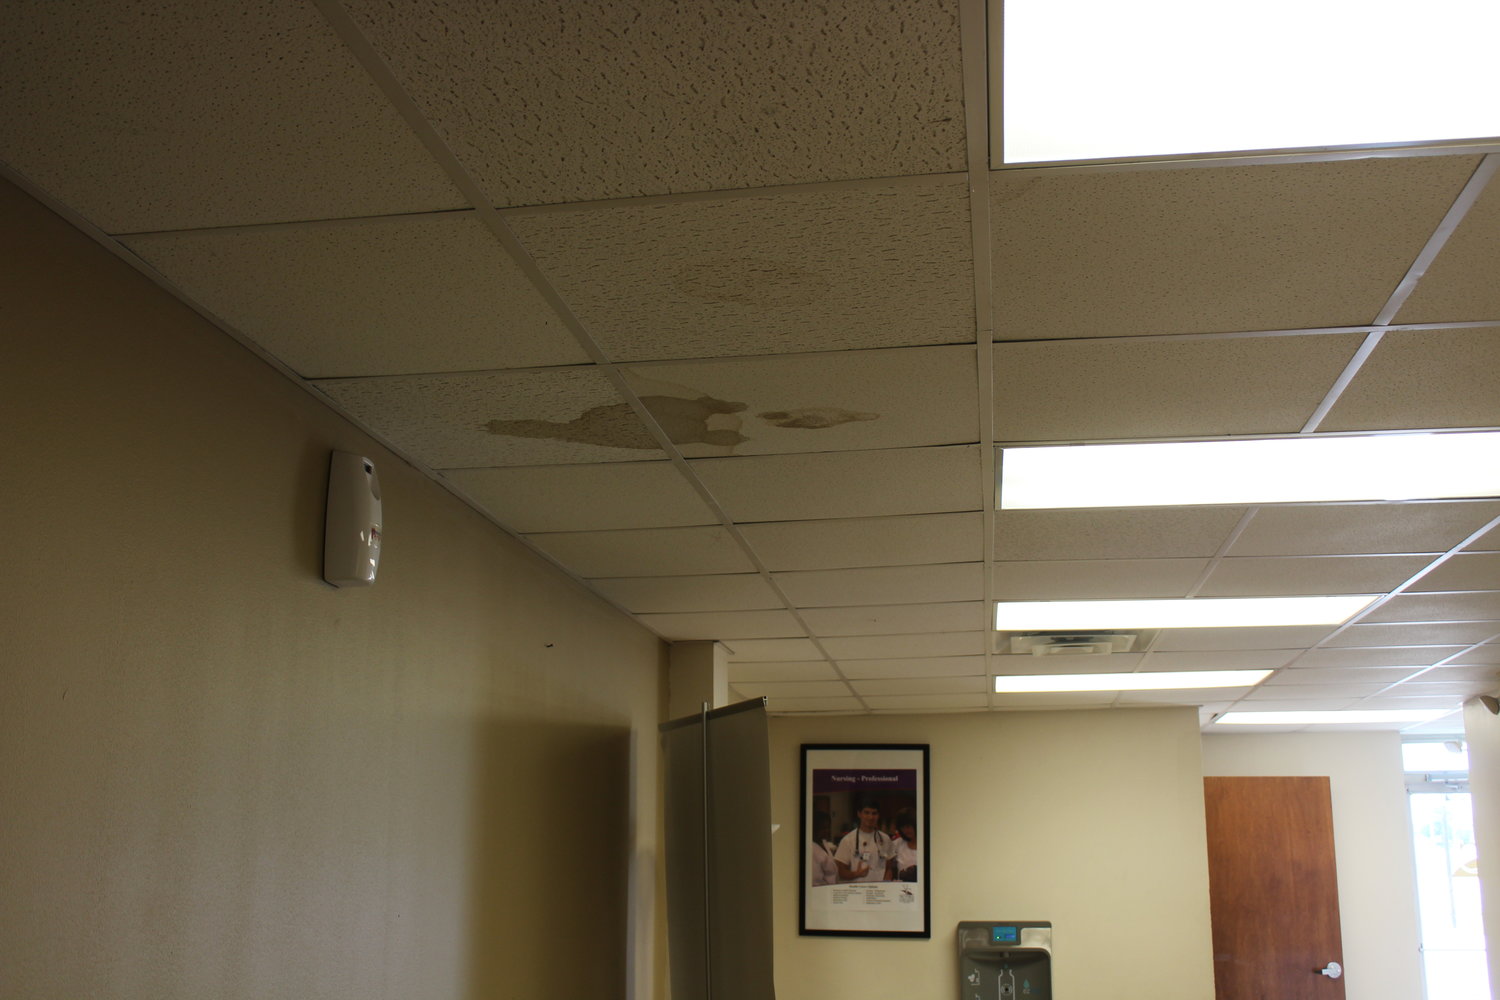 Though Victoria College maintenance staff is usually quick to replace water-stained roof tiles, some still remain. All tiles pictured above are featured in the Victoria College Workforce Training Facility, the building of interest at Gonzales city council’s meeting June 13.